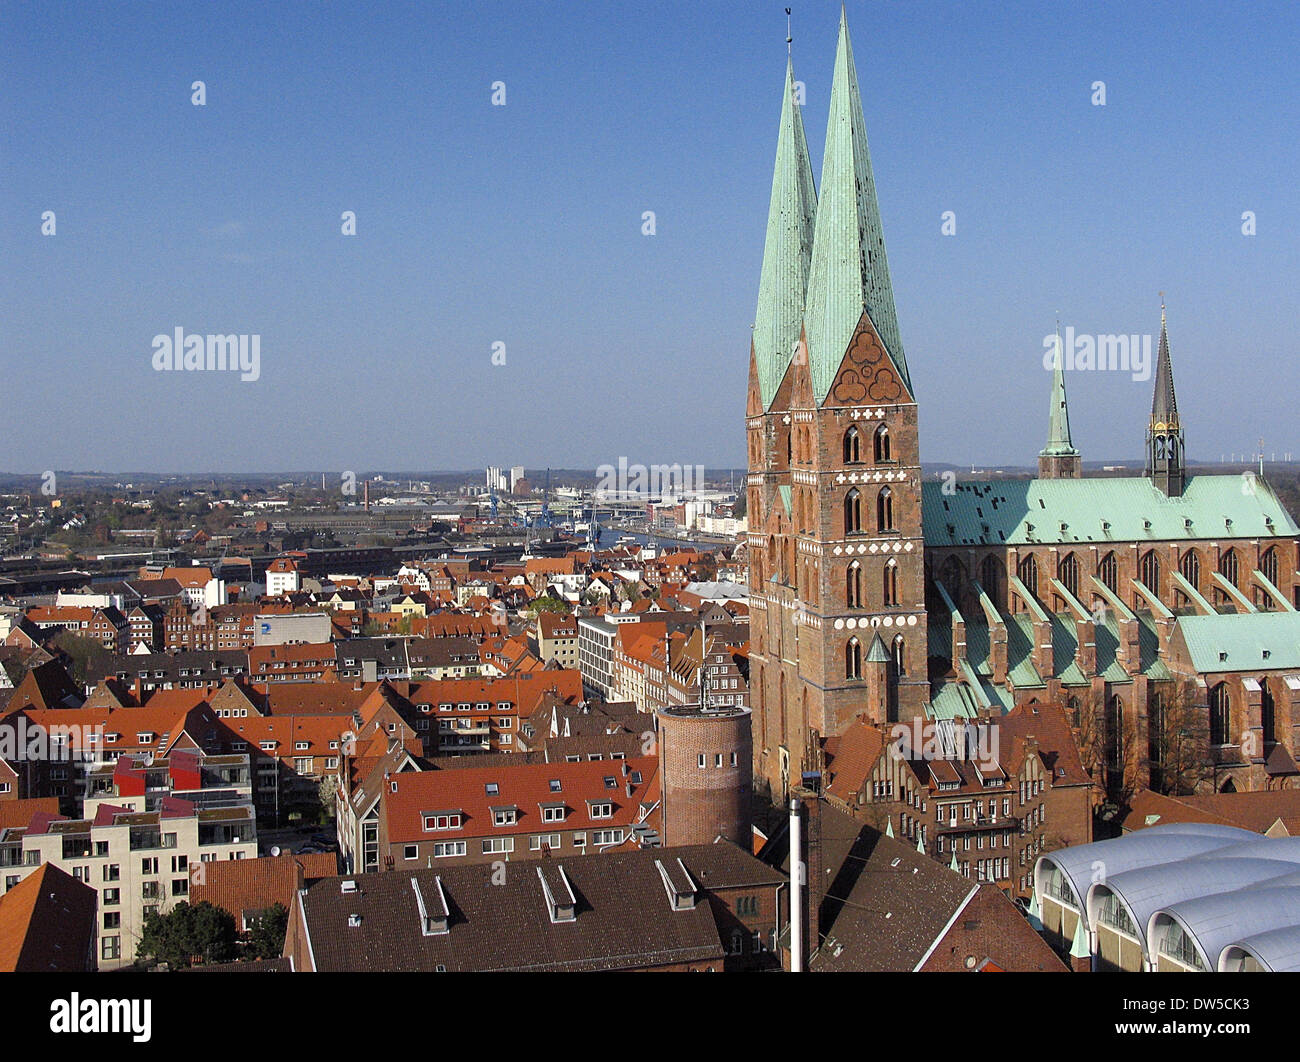 St. Mary's Church transmits the history of several ages in itself. The construction shapes the silhouette of Lübeckand represents the religiosity and the pride of the emerging middle class. Photo: Klaus Nowottnick Date: April 10, 2009 Stock Photo